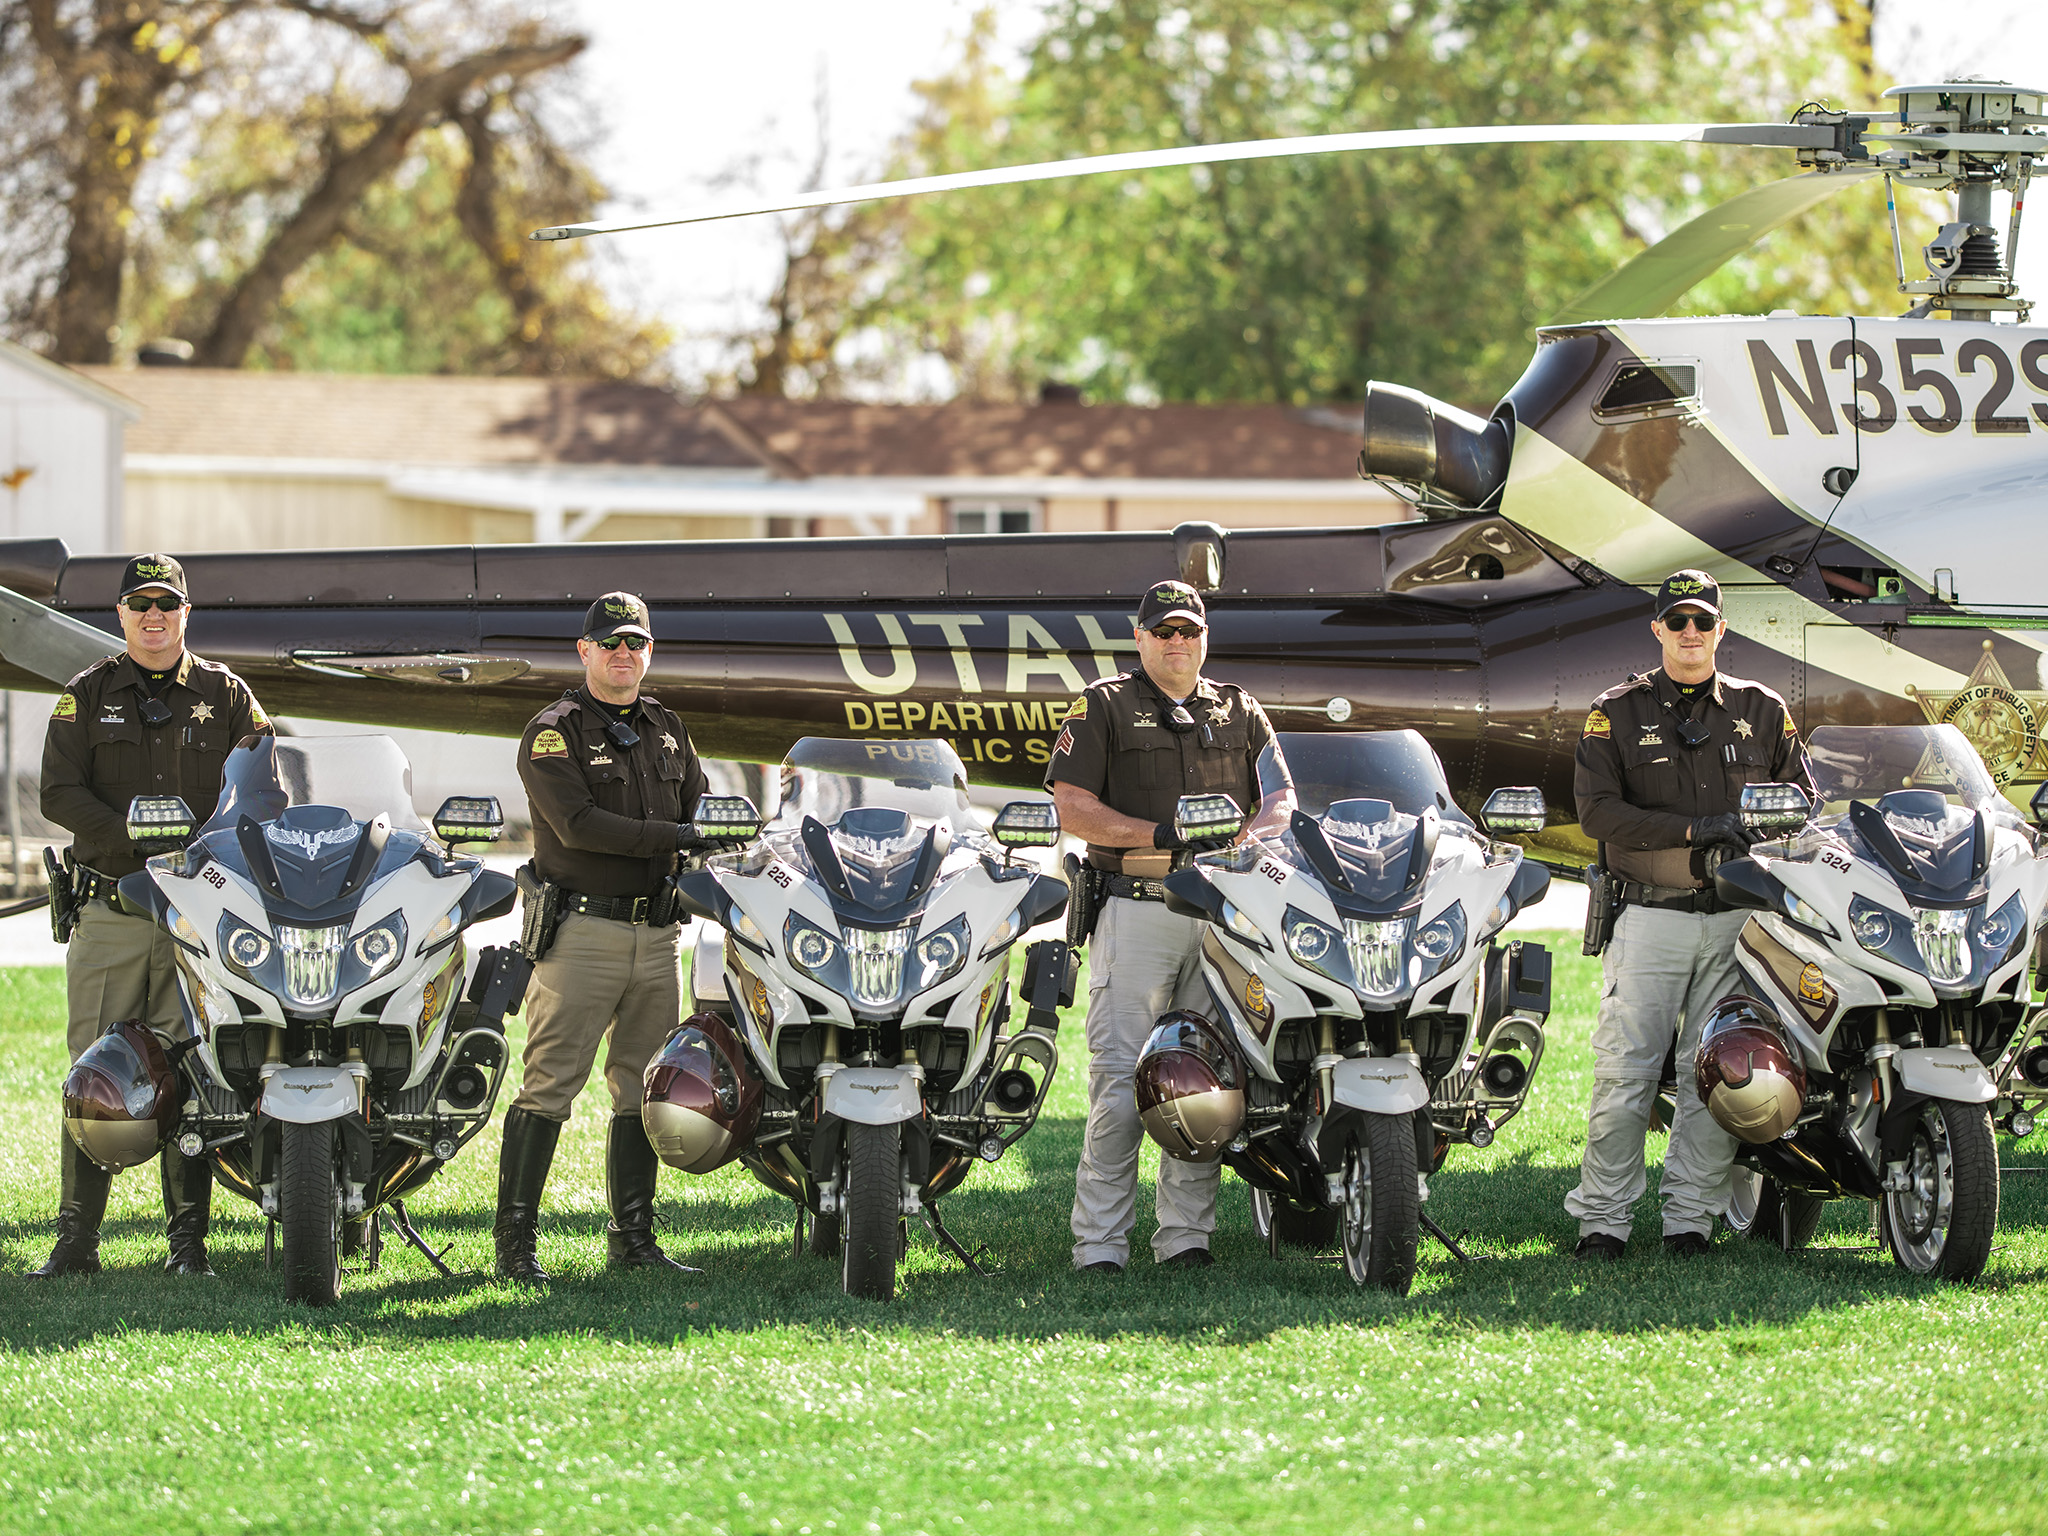 Four members of the motor squad stand by their motorcycles which are parked next to the helicopter/